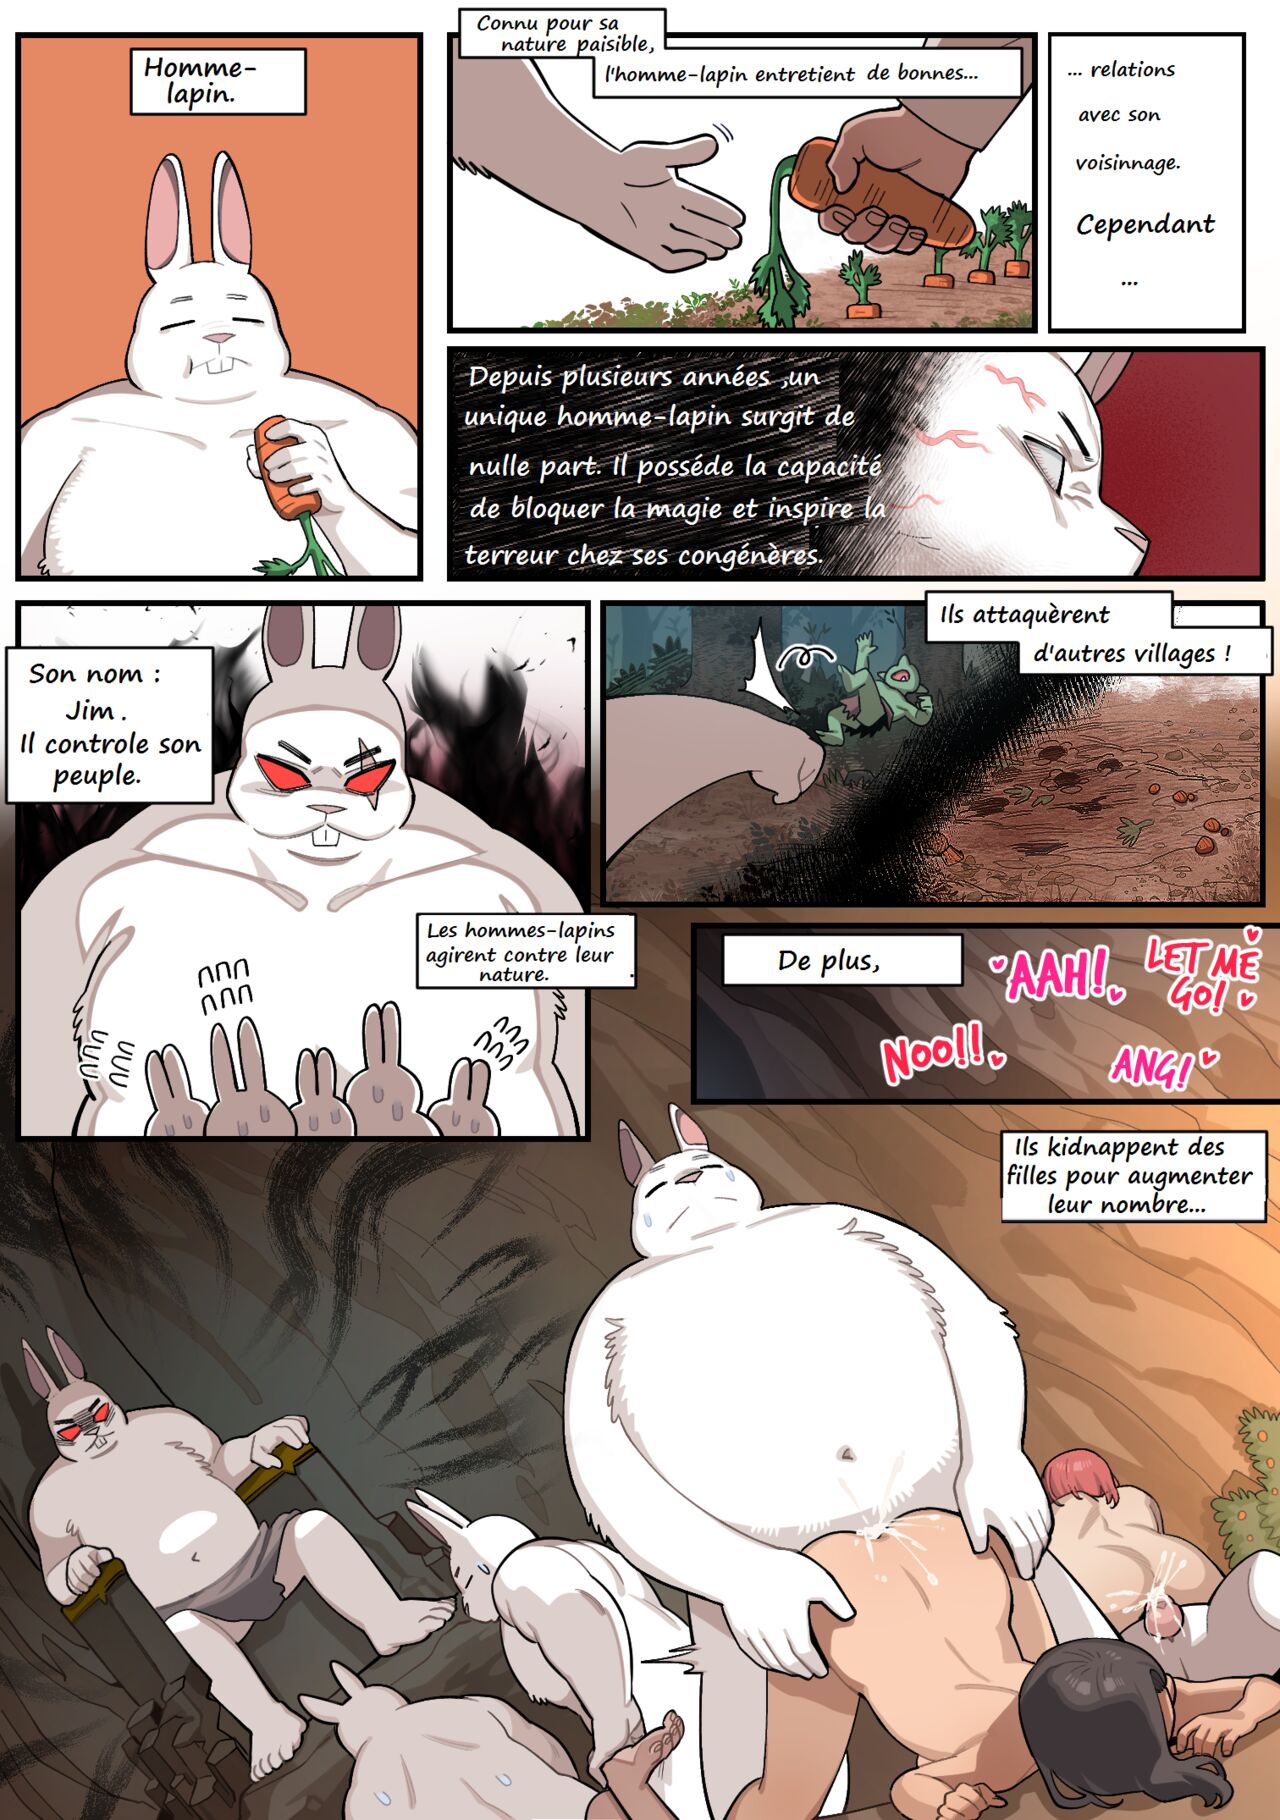 Bunnyman Hunting Mission Part 1 numero d'image 11